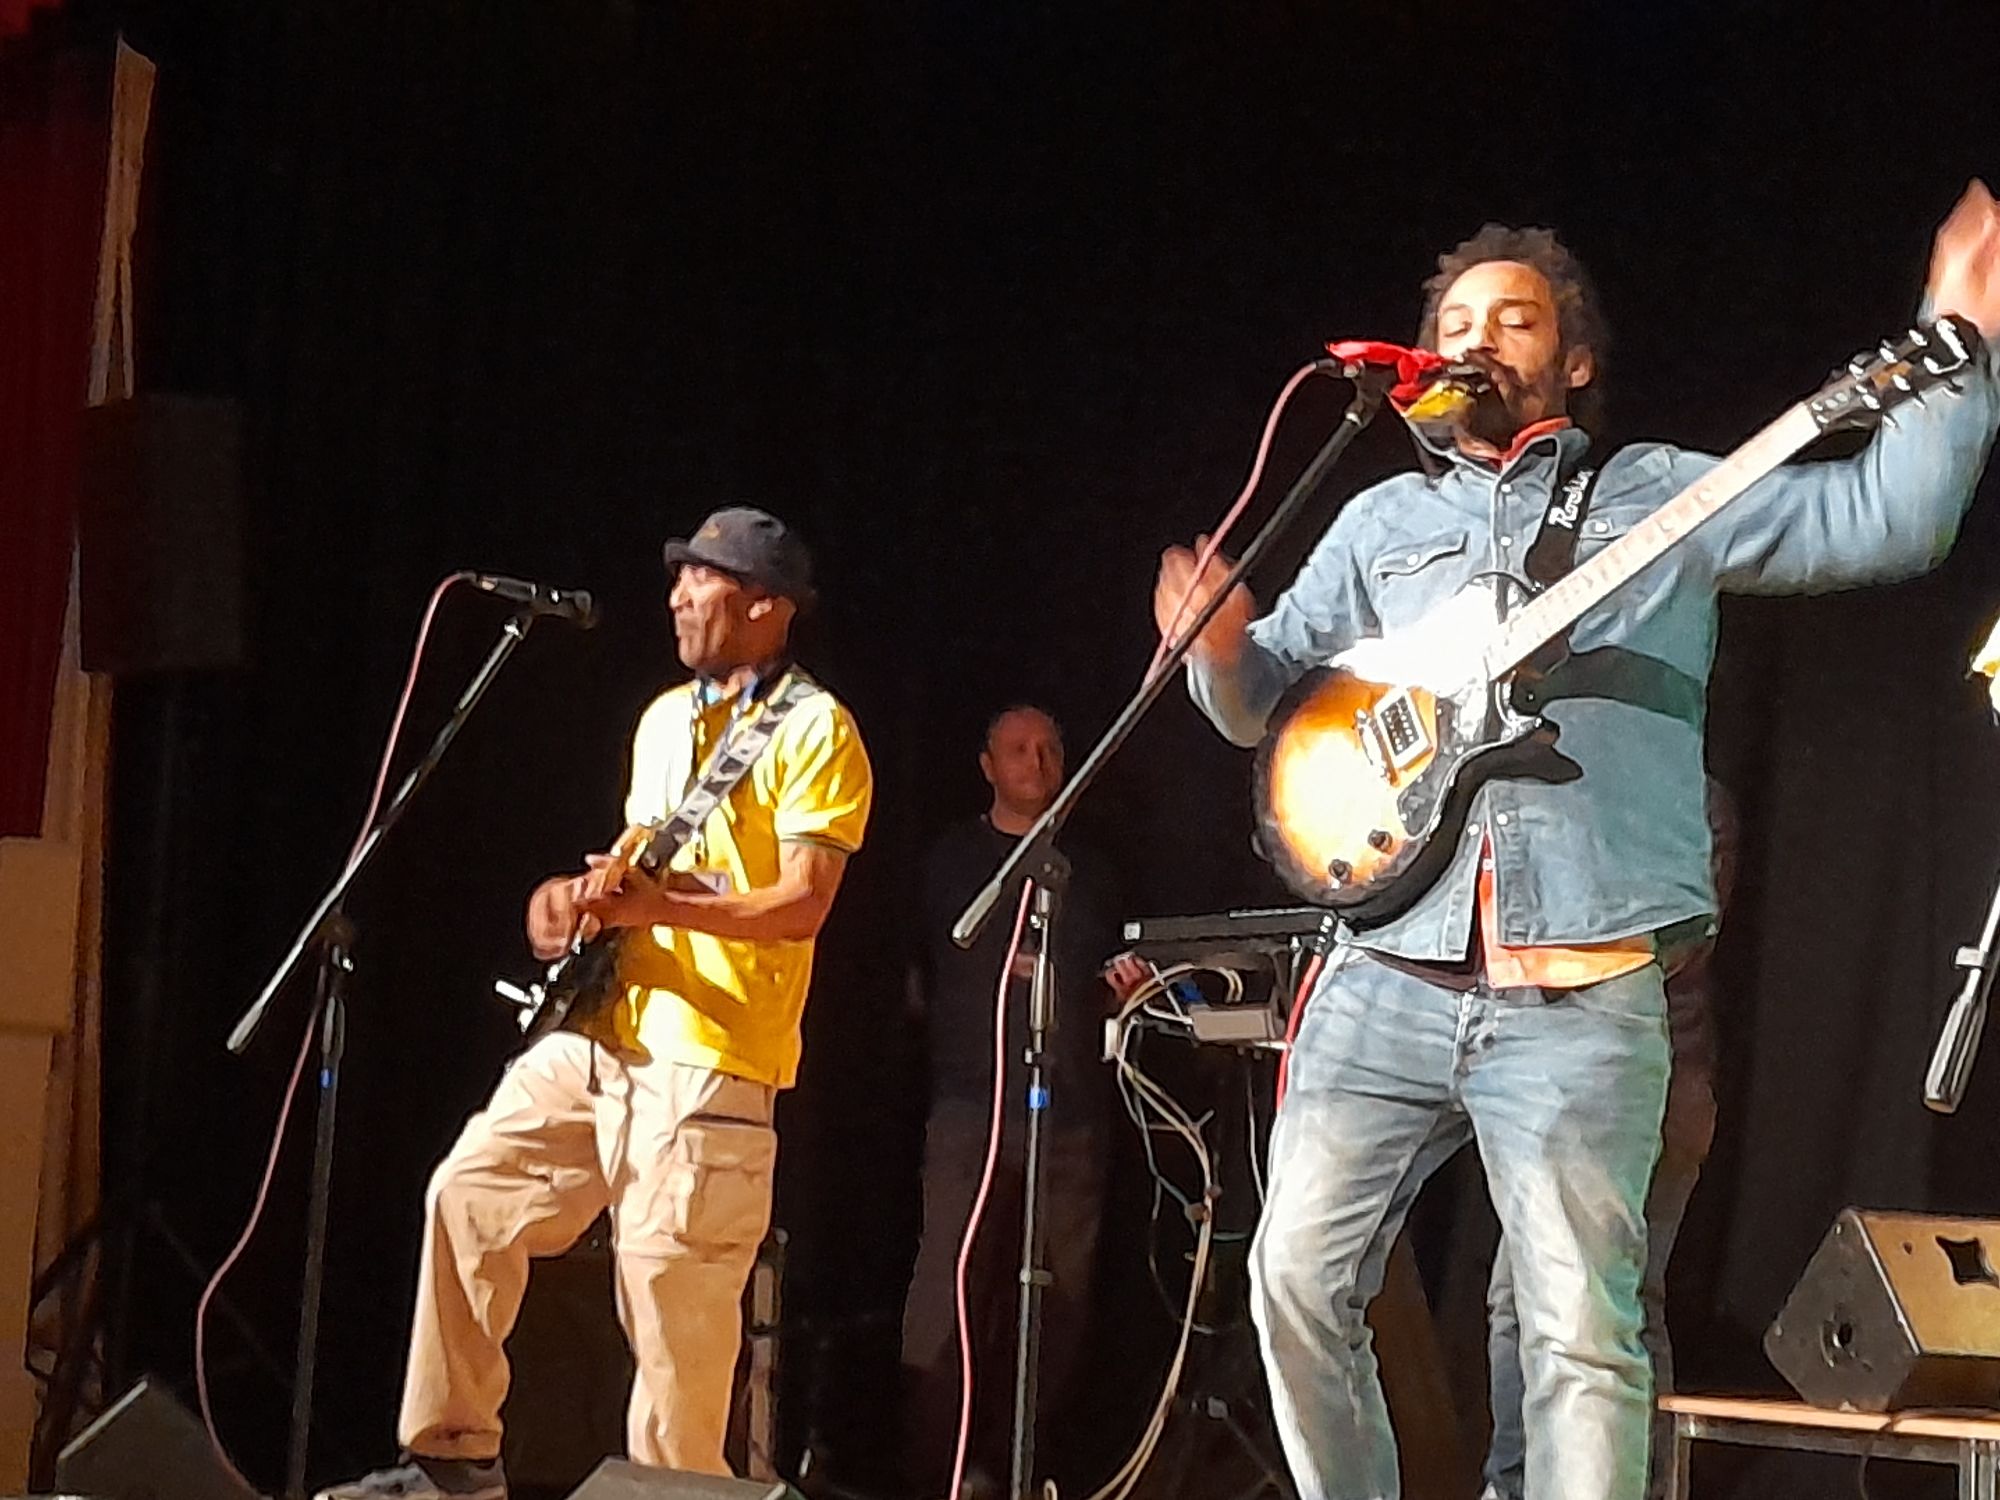 Jammin’ till the Jam is Through: The Marley Experience Came to Devizes 